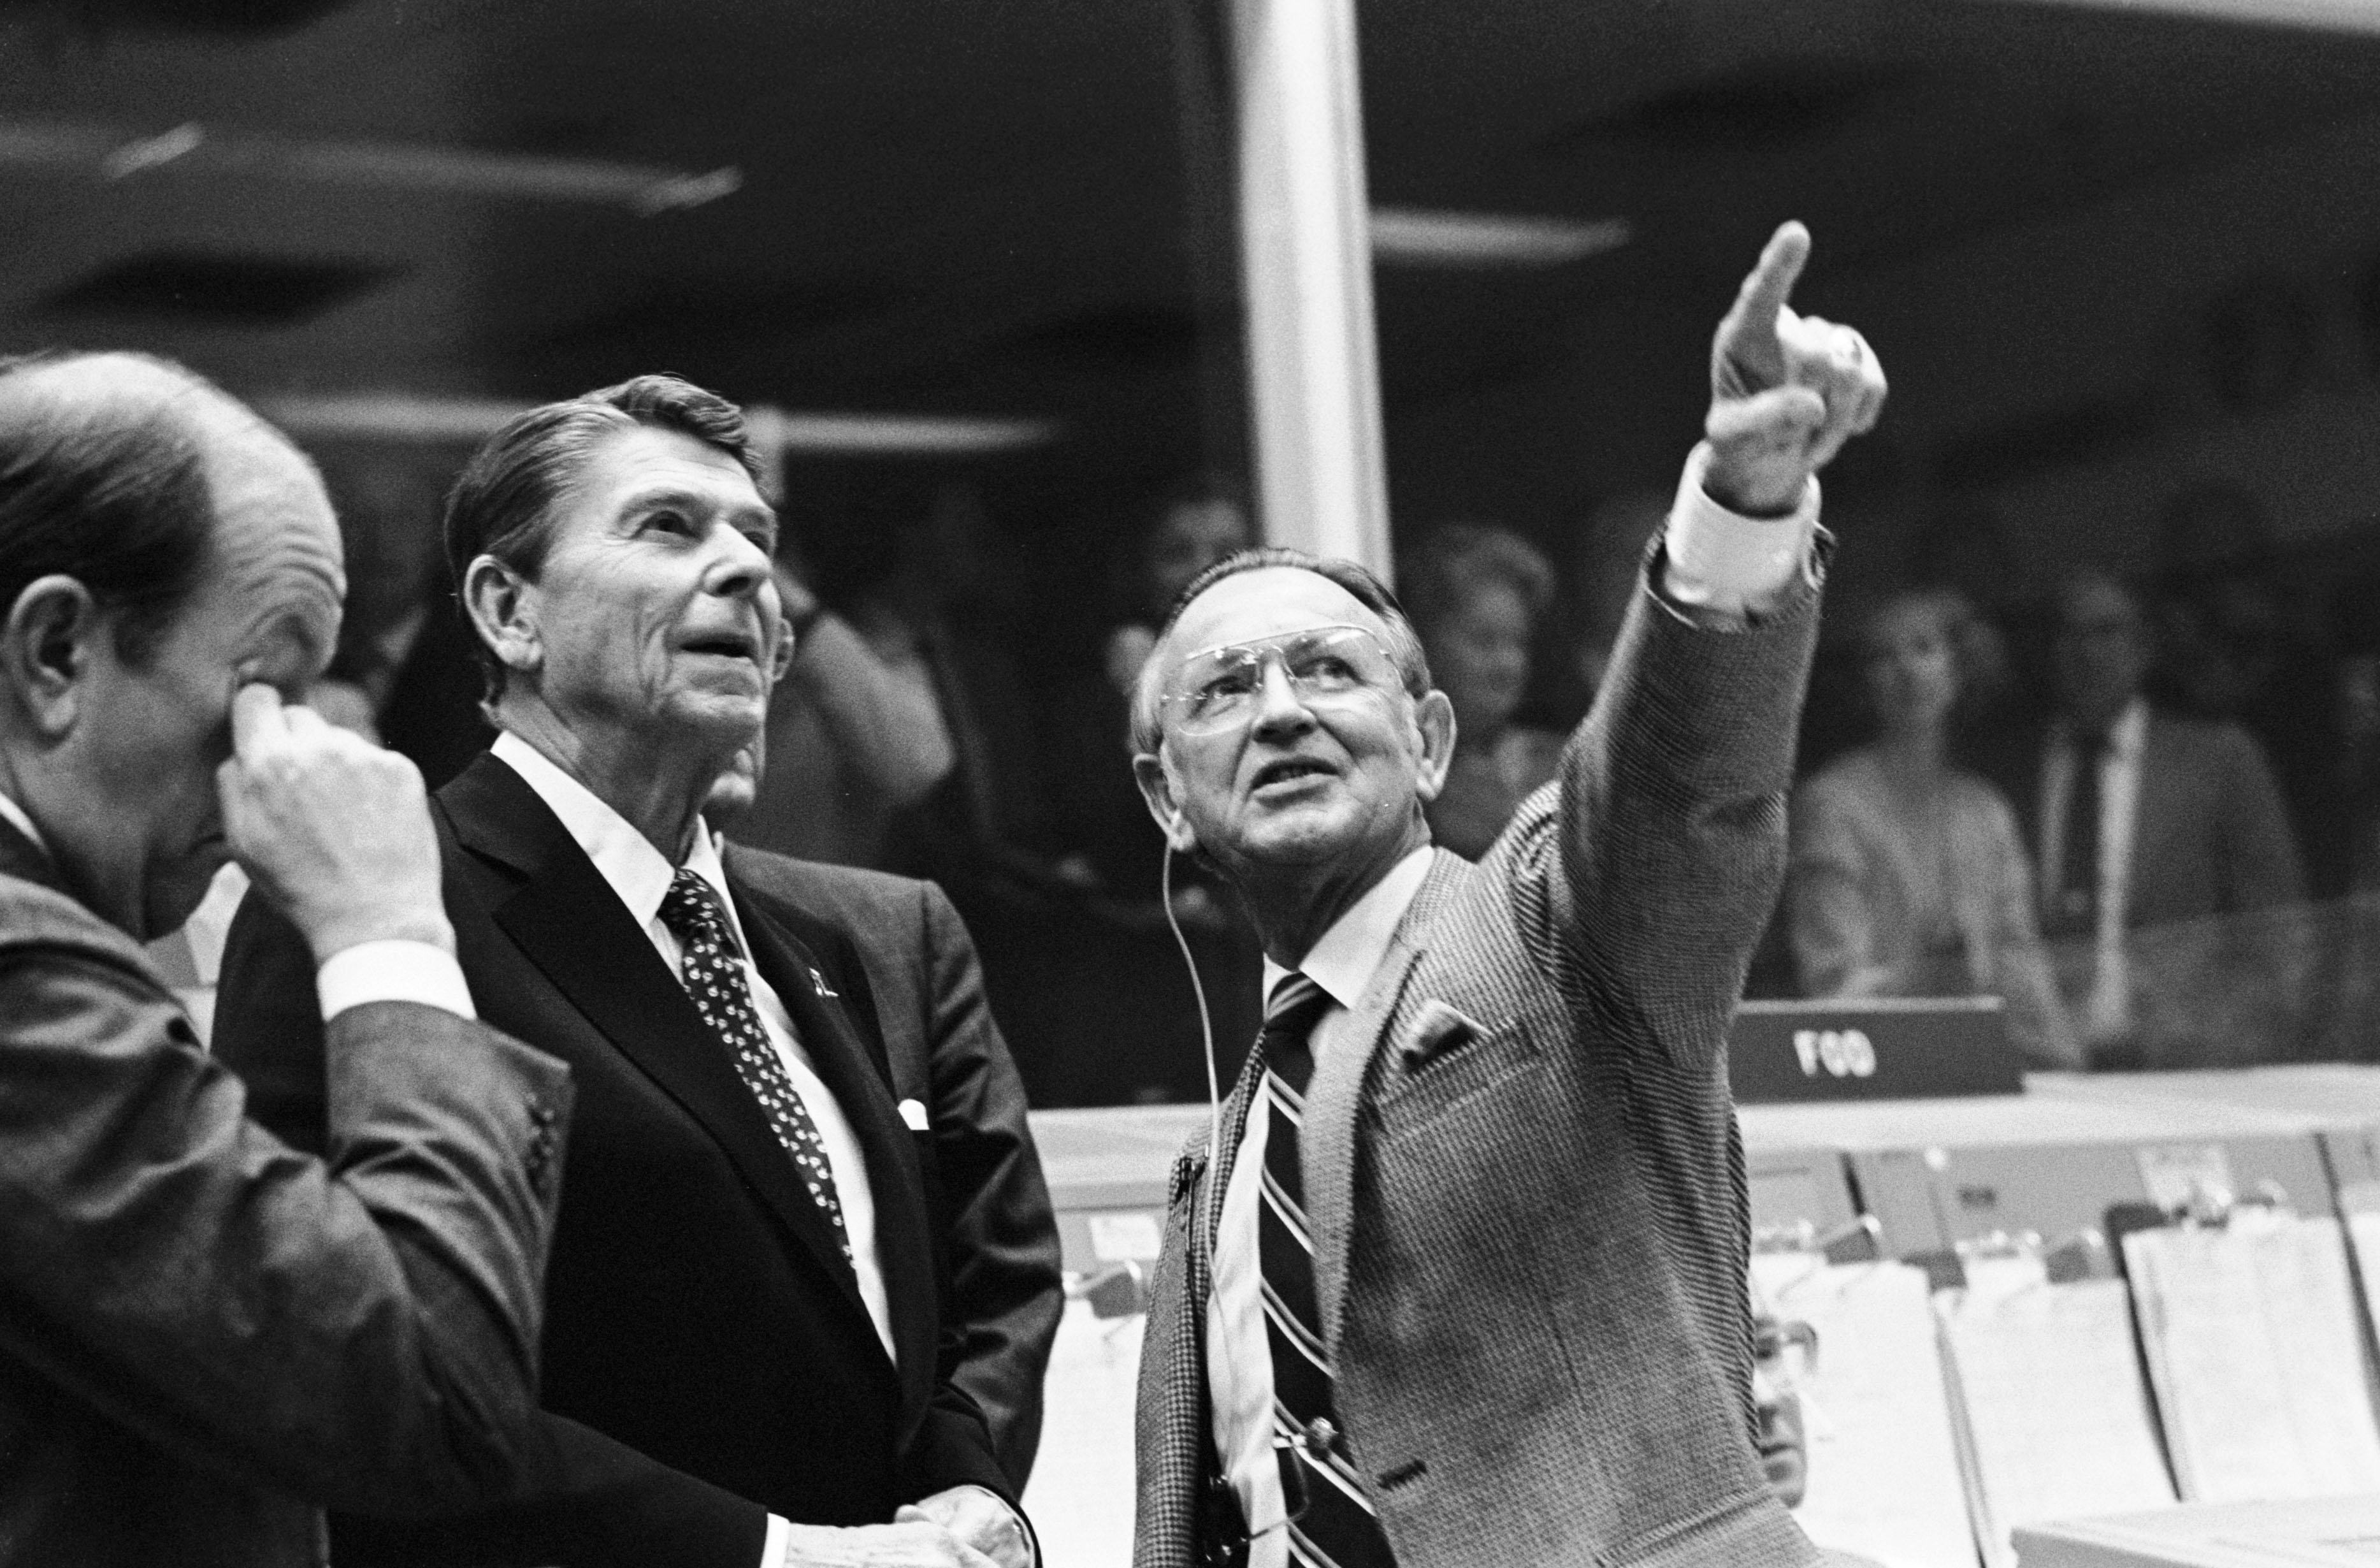 President Ronald Reagan is briefed by JSC Director Christopher C. Kraft Jr., who points toward the orbiter spotter on the projection plotter in the front of the mission operations control room in the Johnson Space Center's Mission Control Center